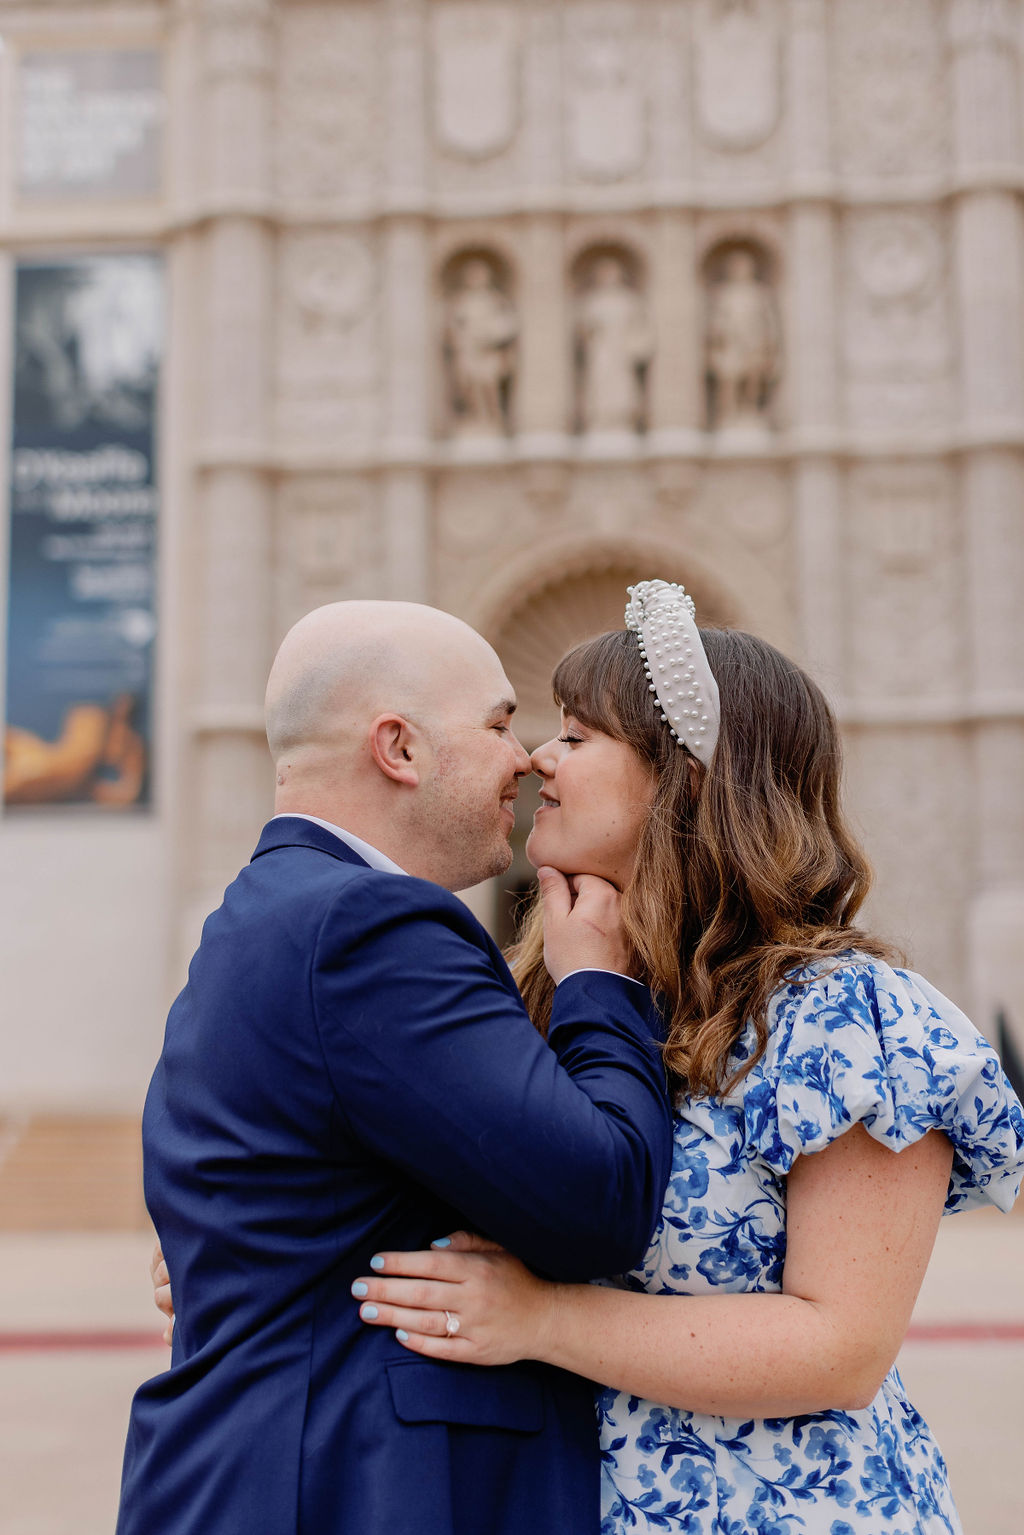 Engagement photo of Jimmy and Hannah outside at San Diego Museum of art. |Photo by California Photographer Sarah Block Photography